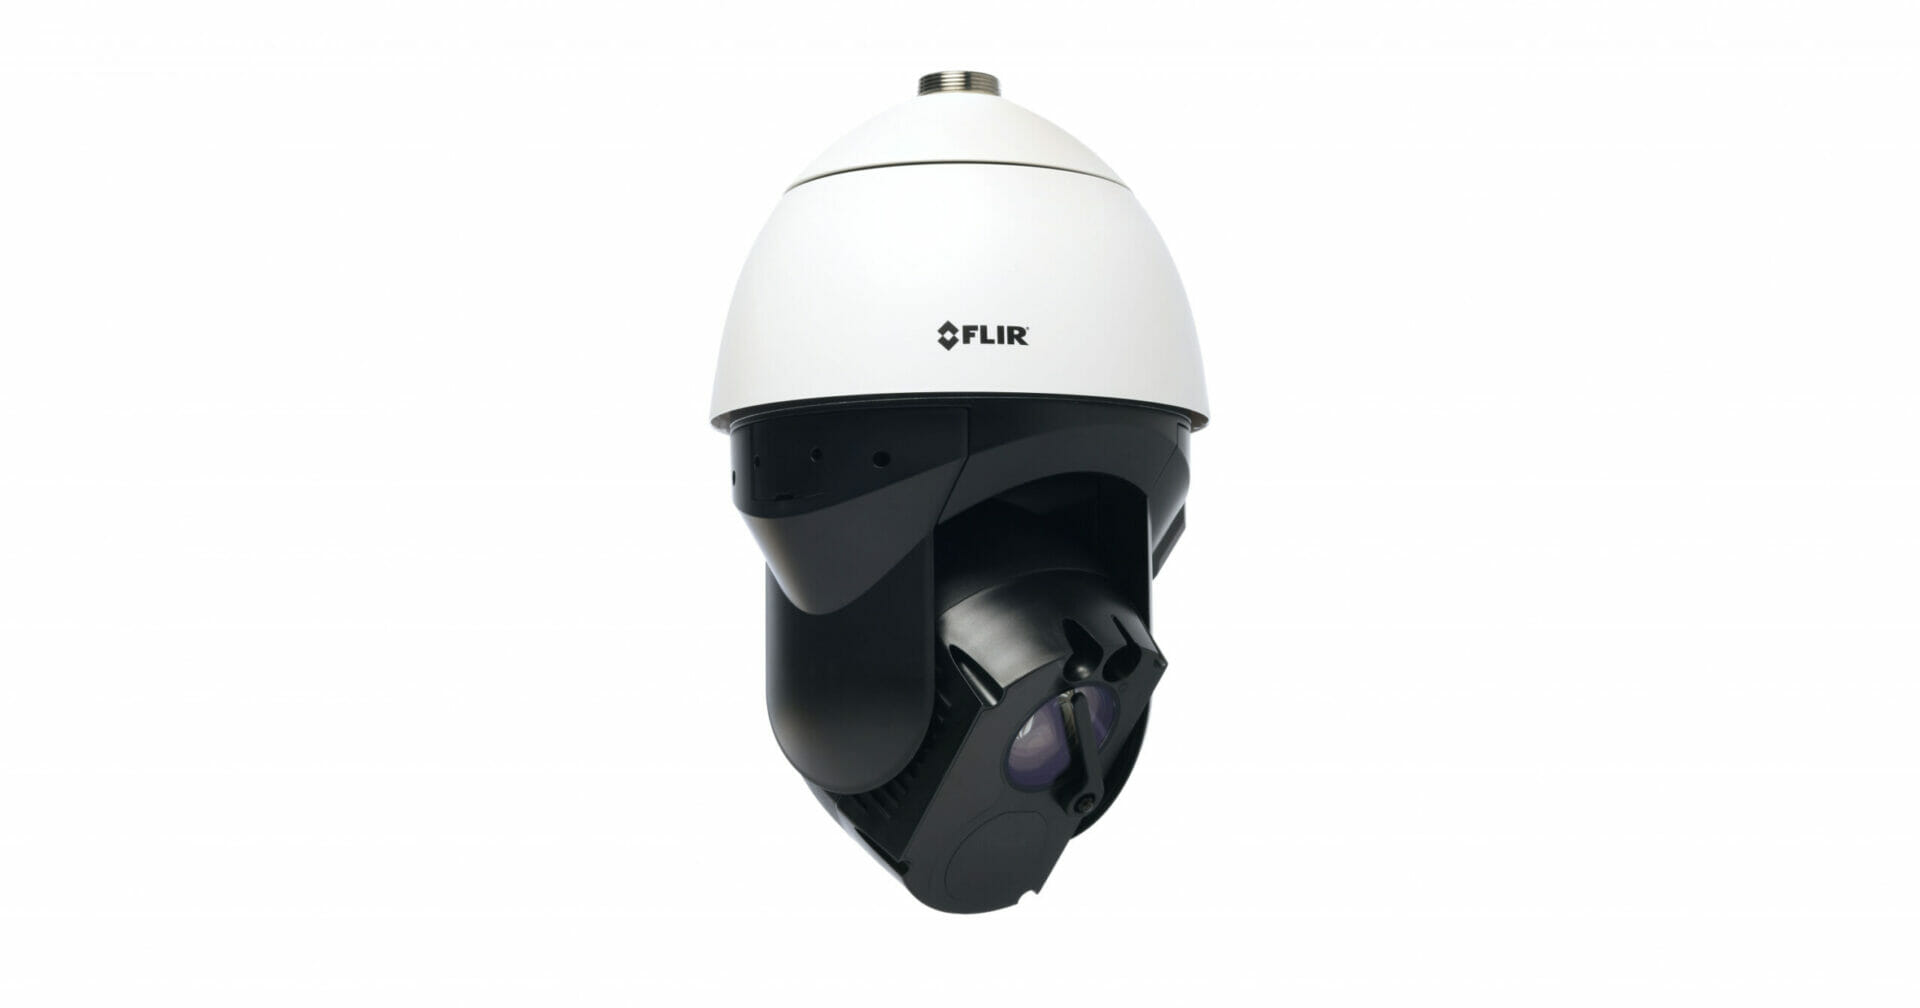 FLIR Systems Introduces Rugged Visible Security Camera for Perimeter Protection and Long-Range Situational Awareness   @flir